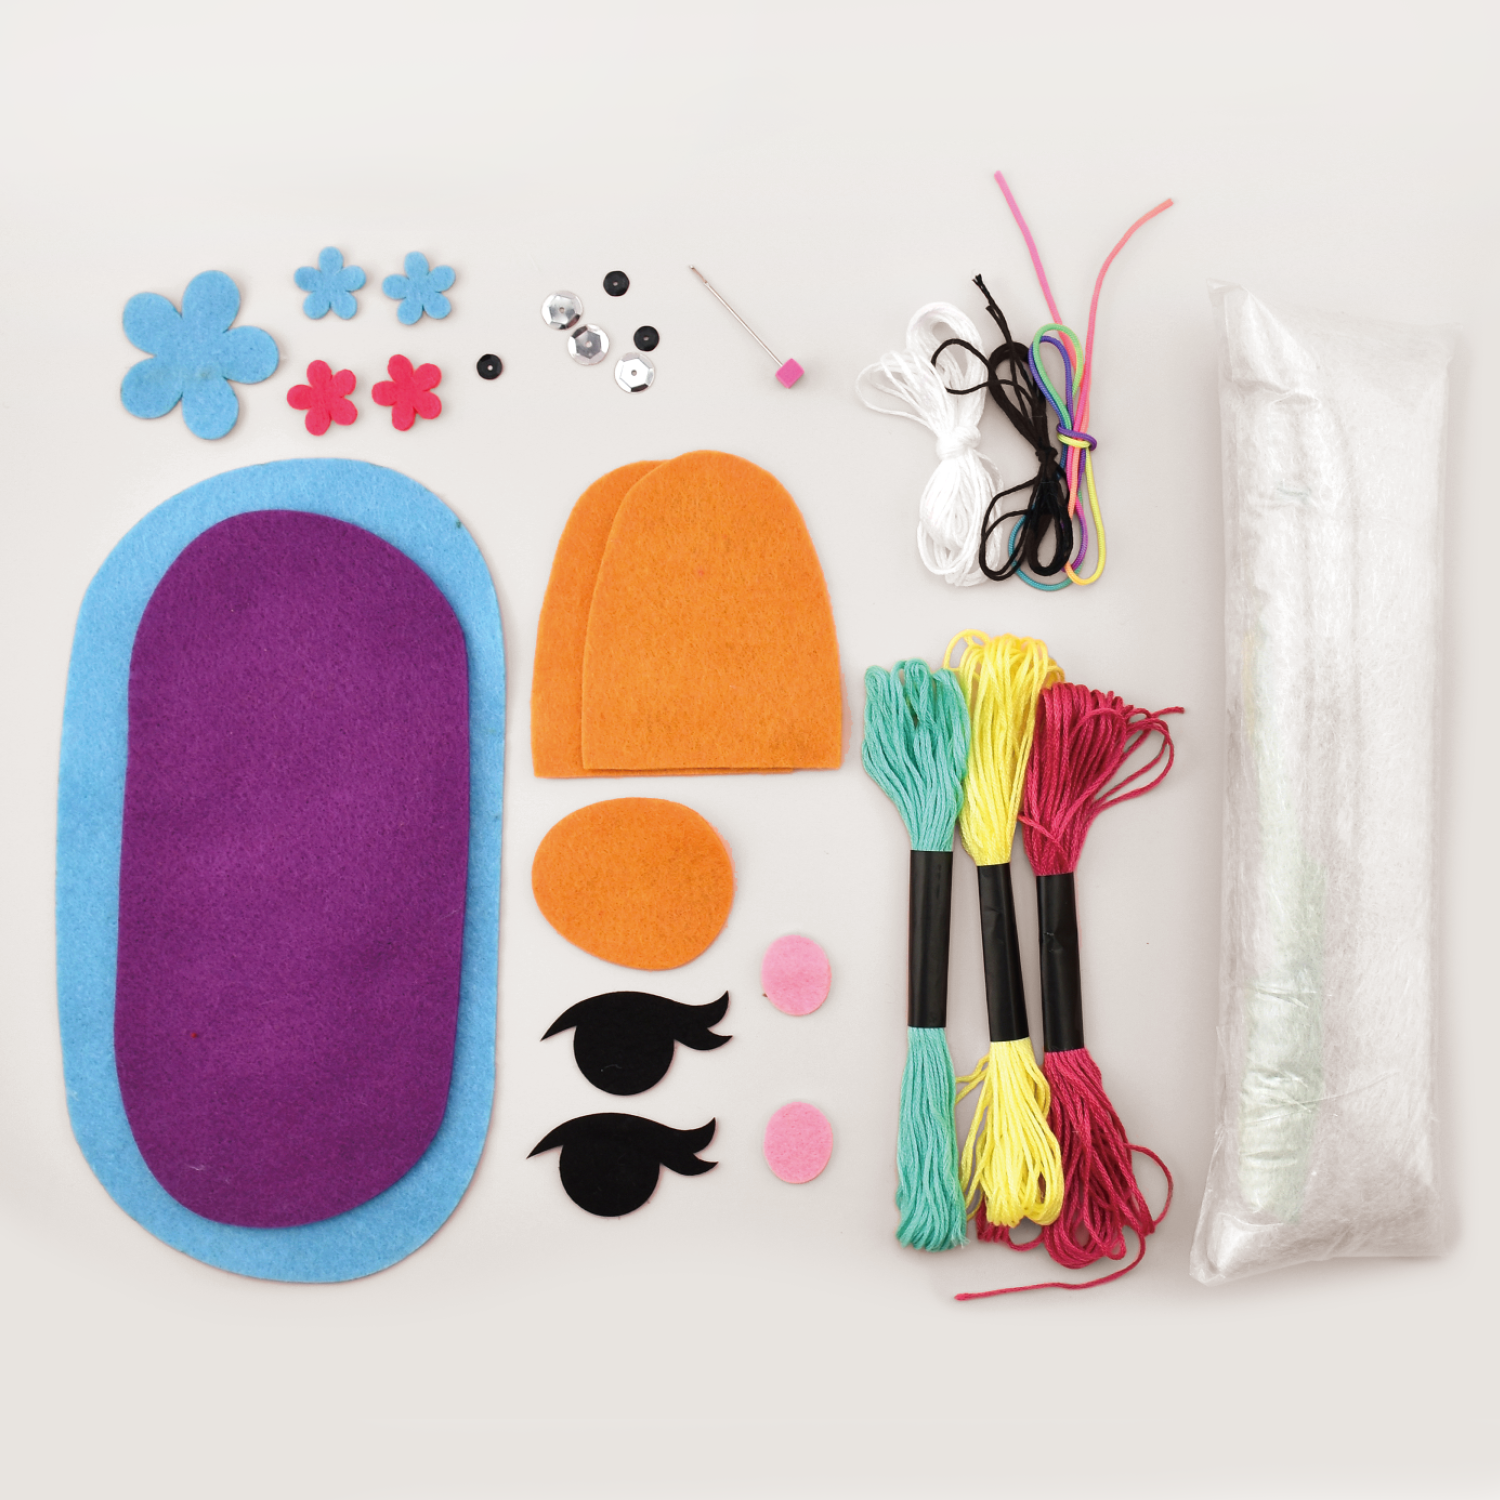 La-la-llama Sewing Kit for Kids - Learn to Sew Your Own Mermaid